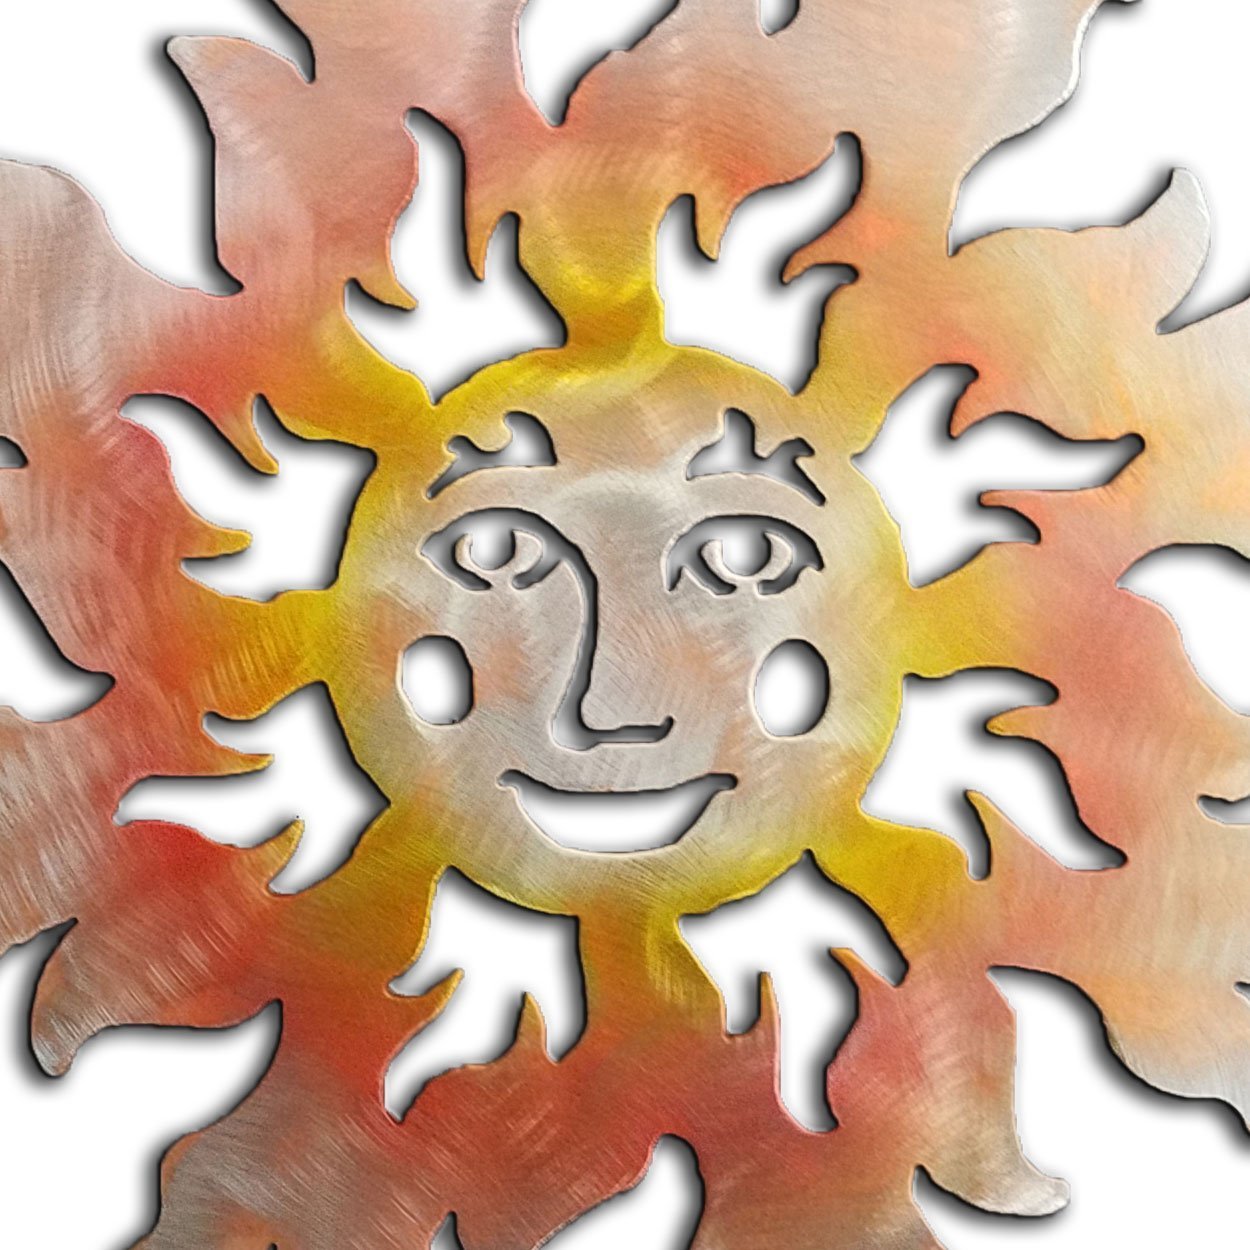 165073 - 24-inch large Smiling Sun Face 3D Metal Wall Art in a vibrant sunset swirl finish